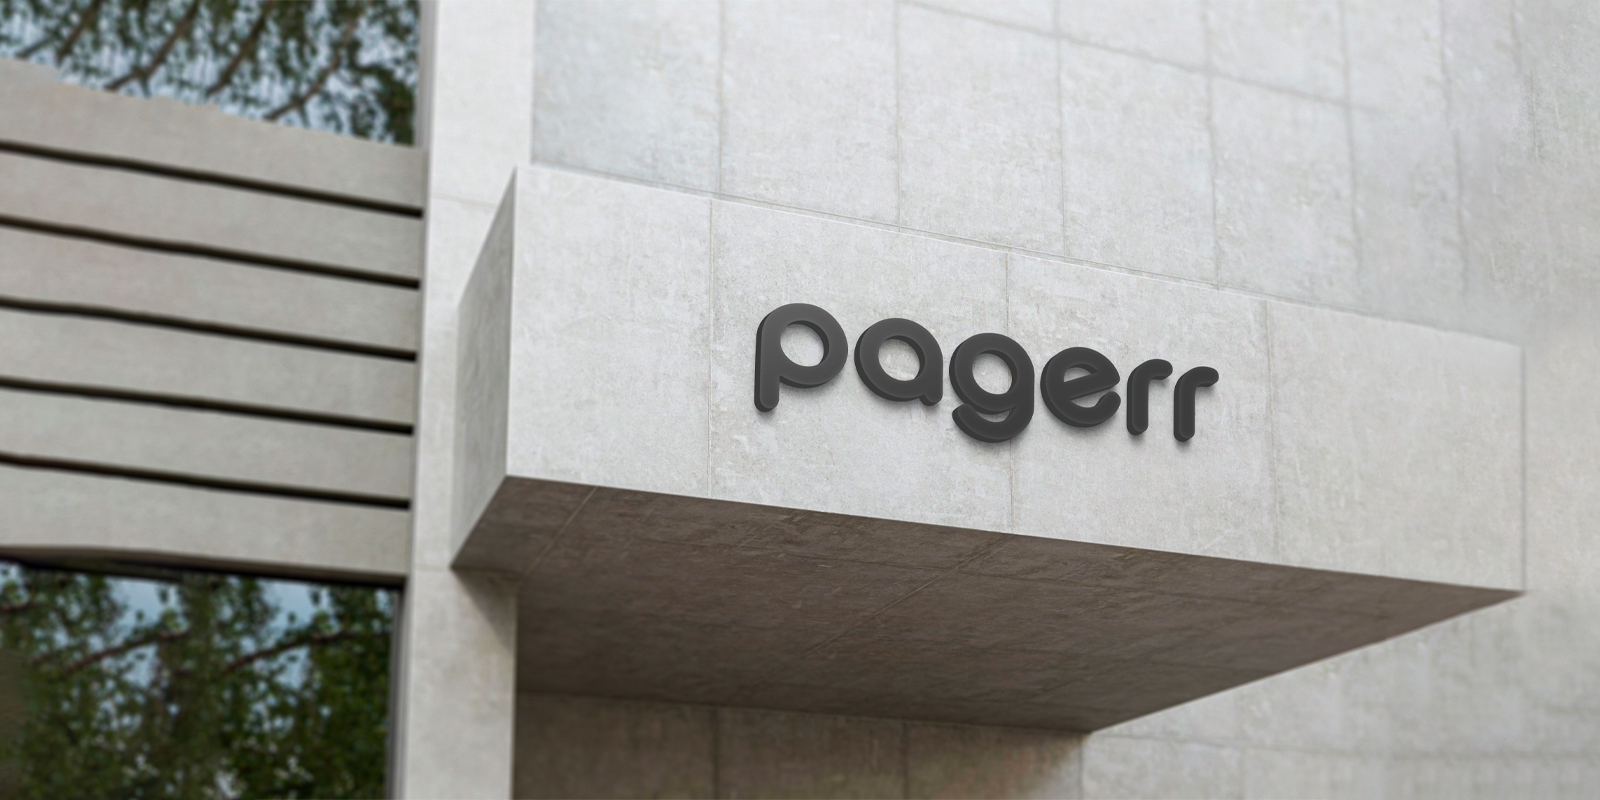 Logo signs in Perth - Print with Pagerr